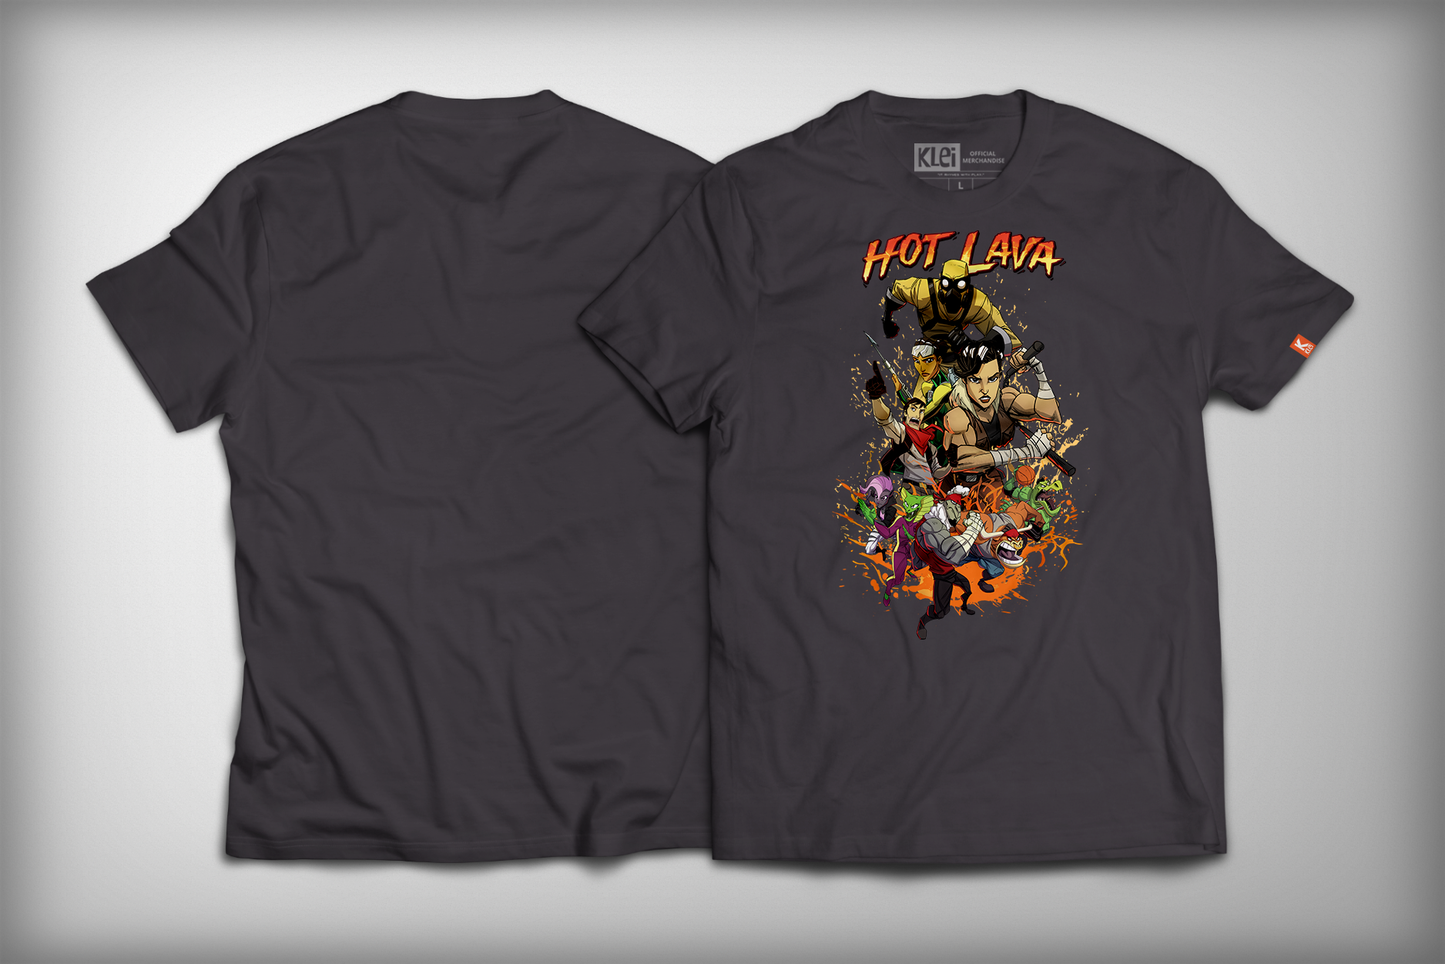 Front and Back of the Hot Lava Shirt from Klei